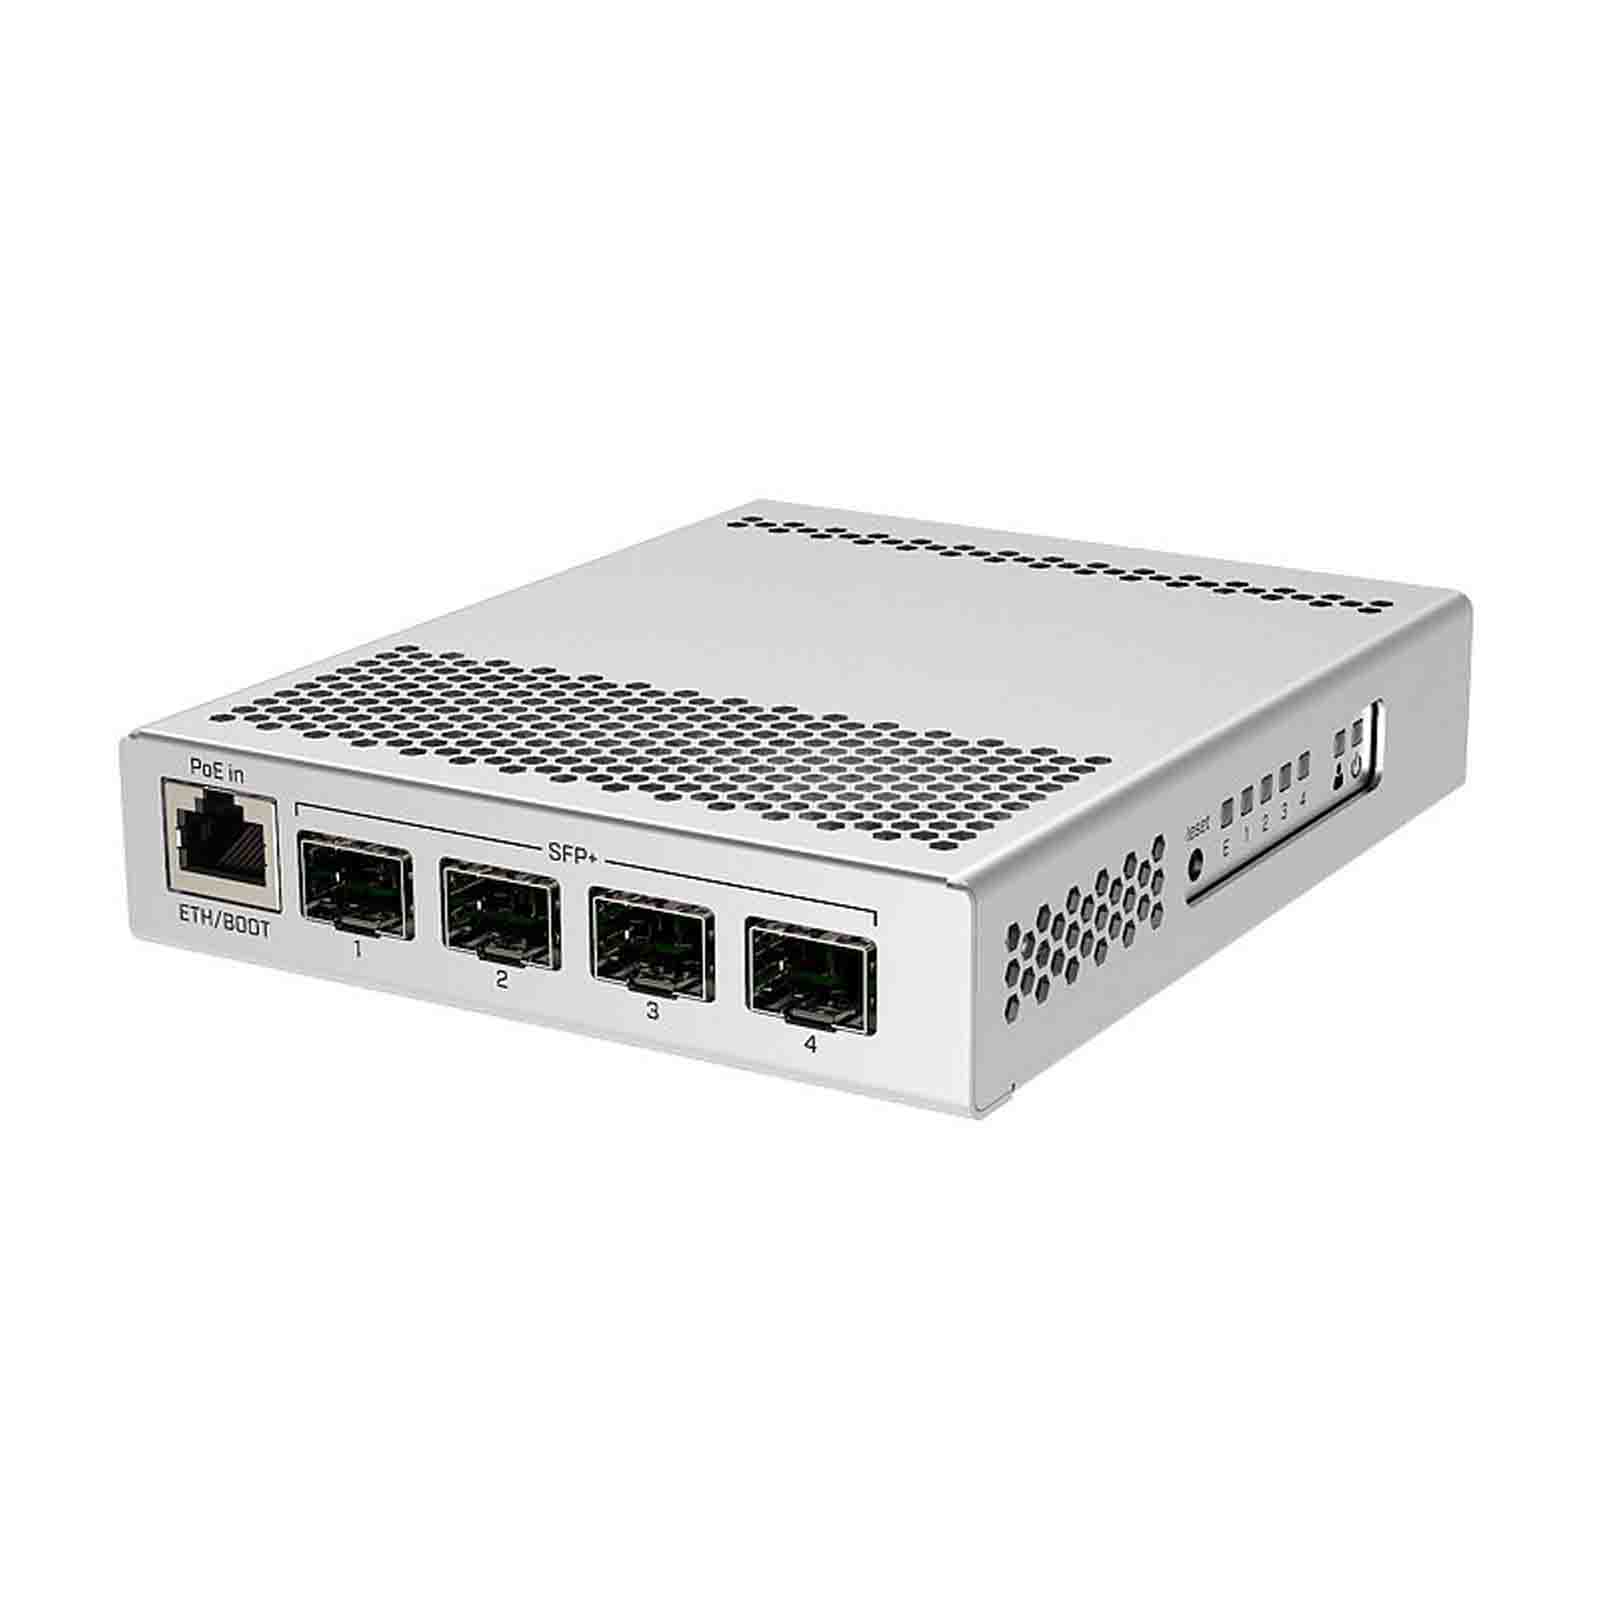 MikroTik Cloud Router Switch CRS305-1G-4S+IN